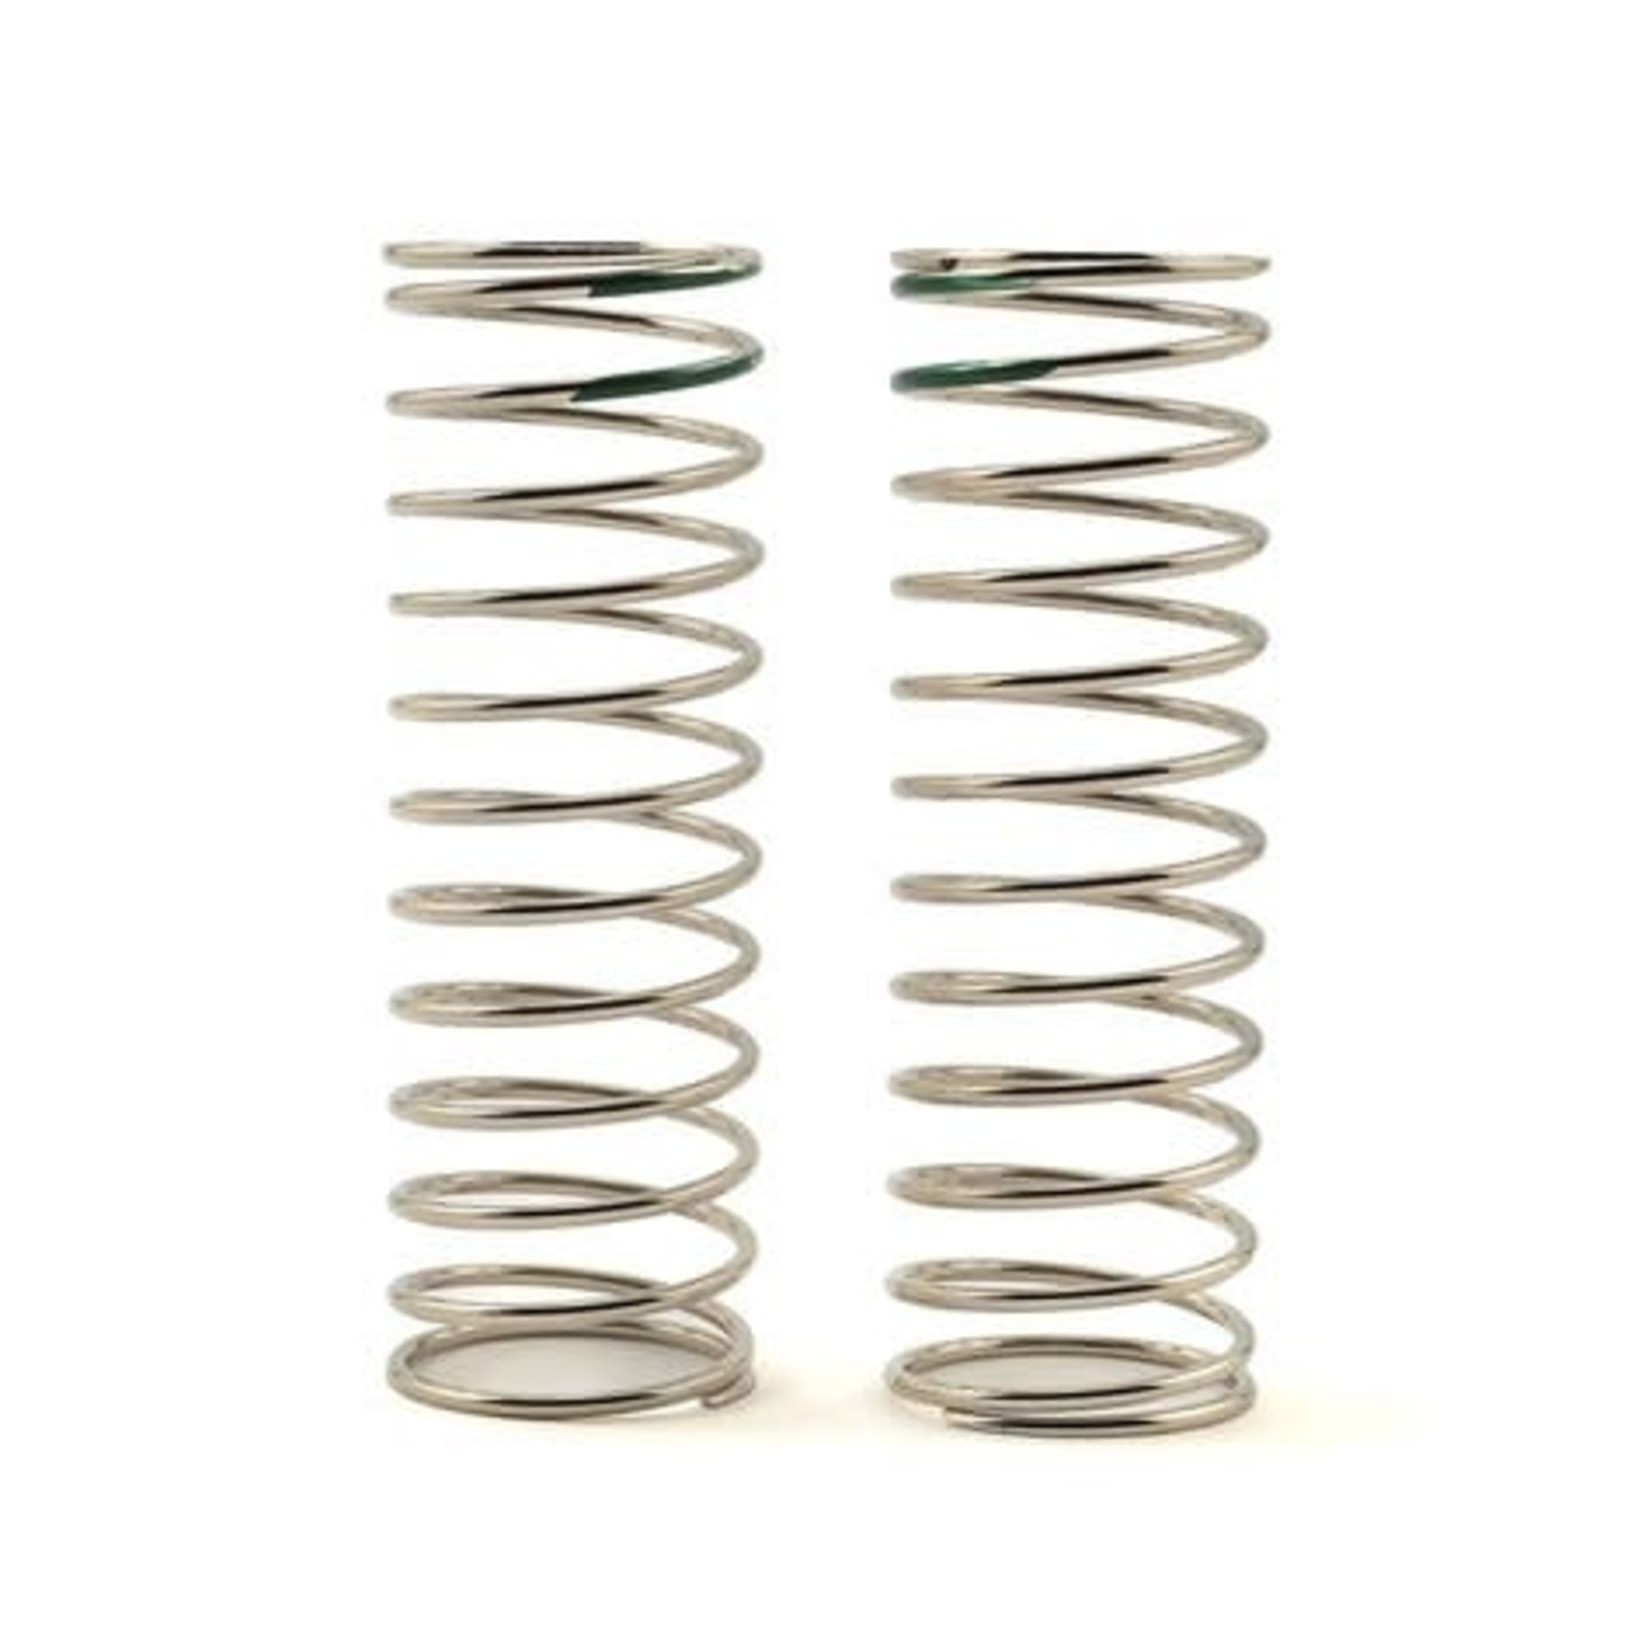 Tekno RC Tekno RC Low Frequency 70mm Rear Shock Spring Set (Green - 2.44lb/in) (1.5x13.0) #TKR6114